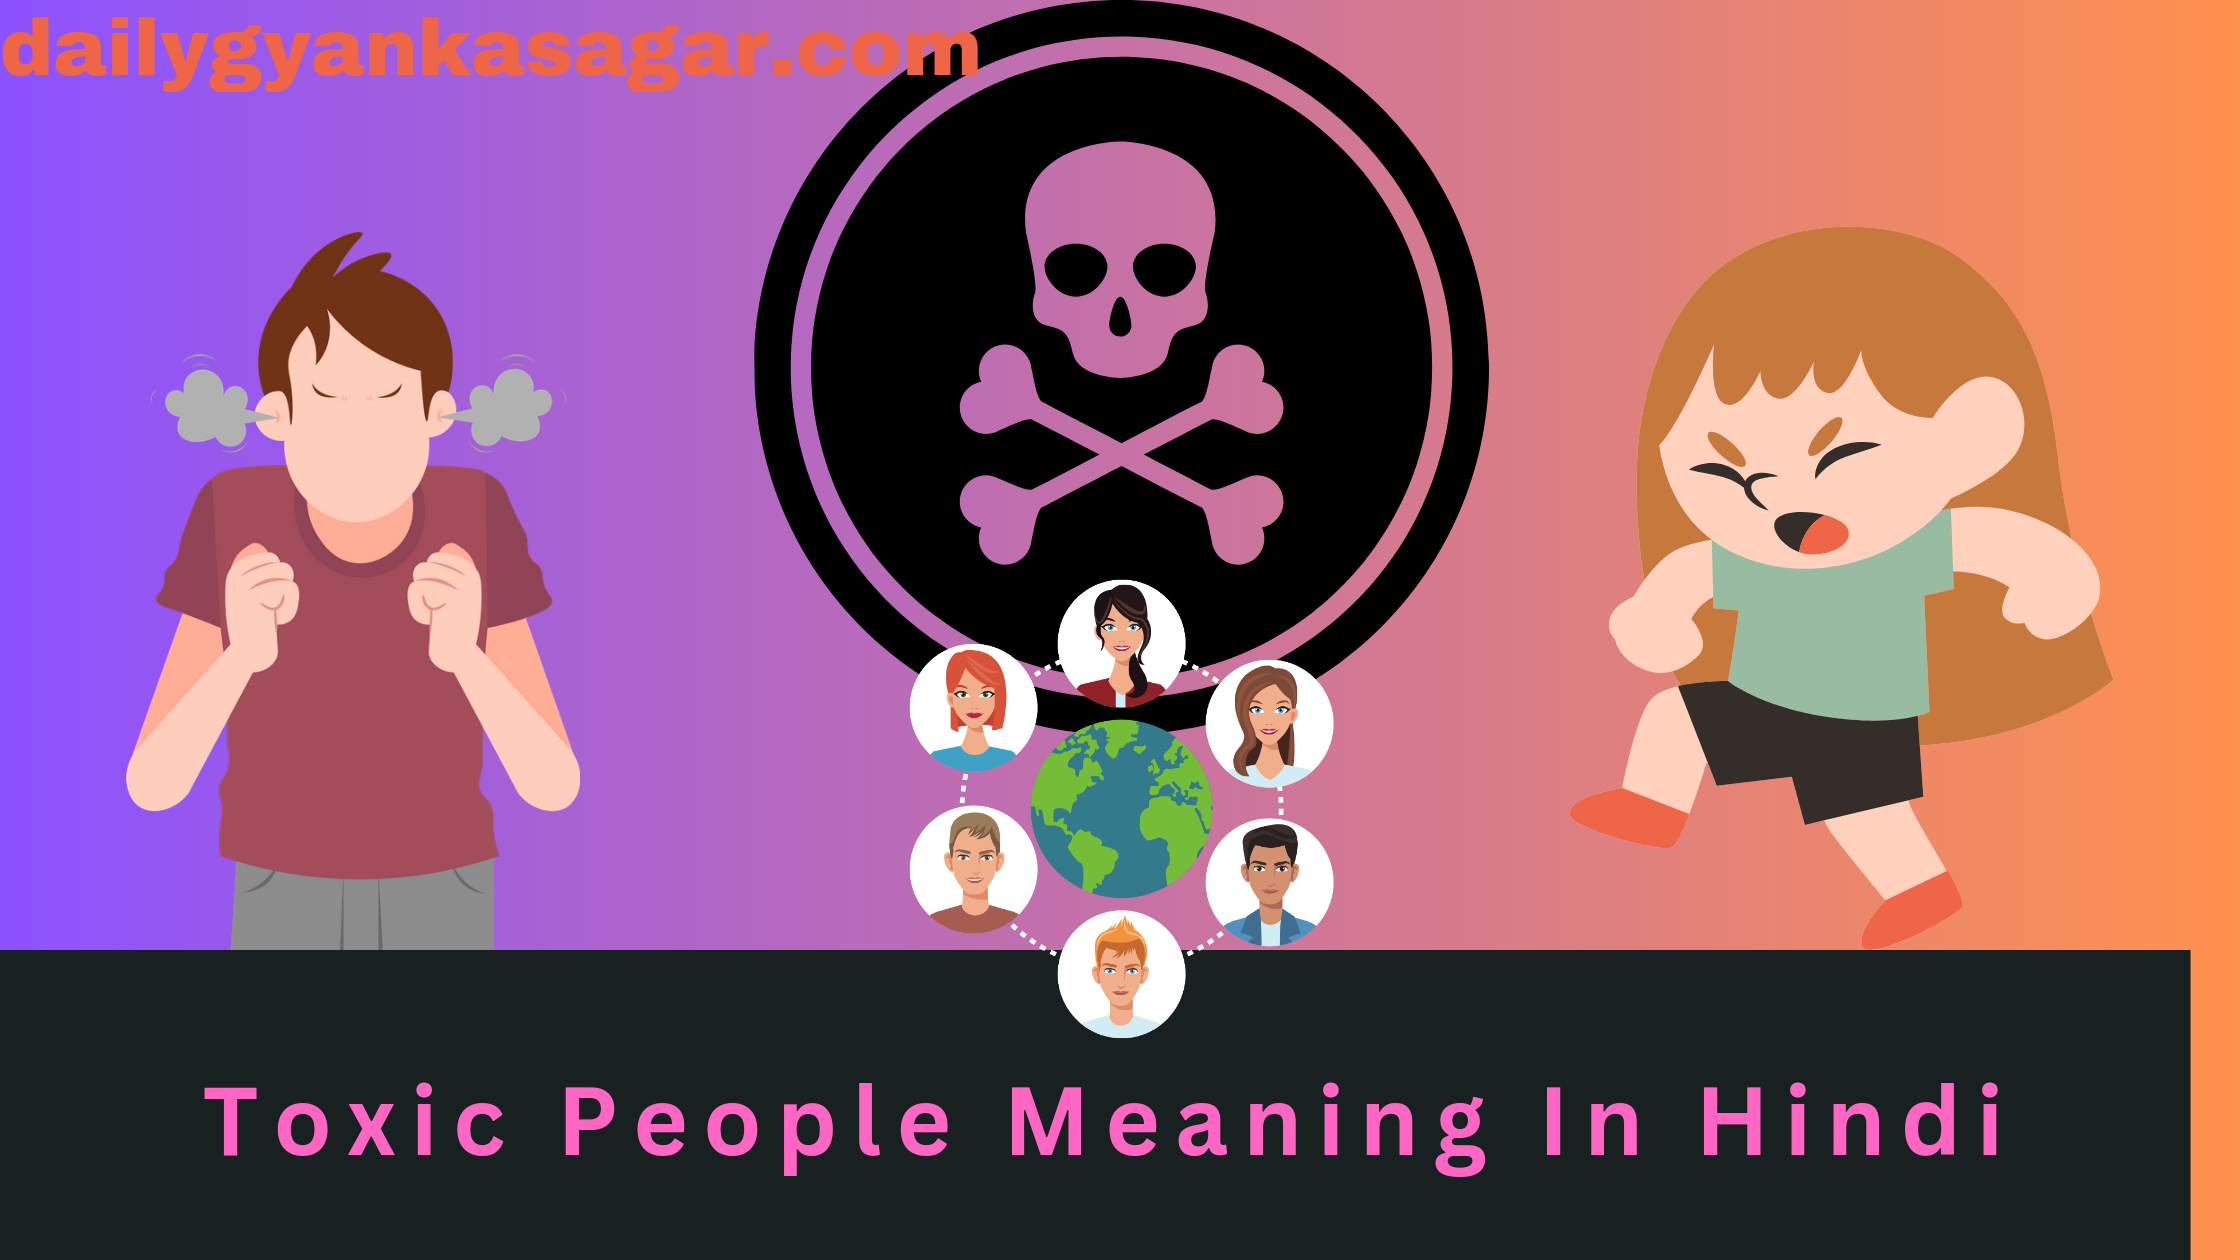 Toxic People Meaning In Hindi